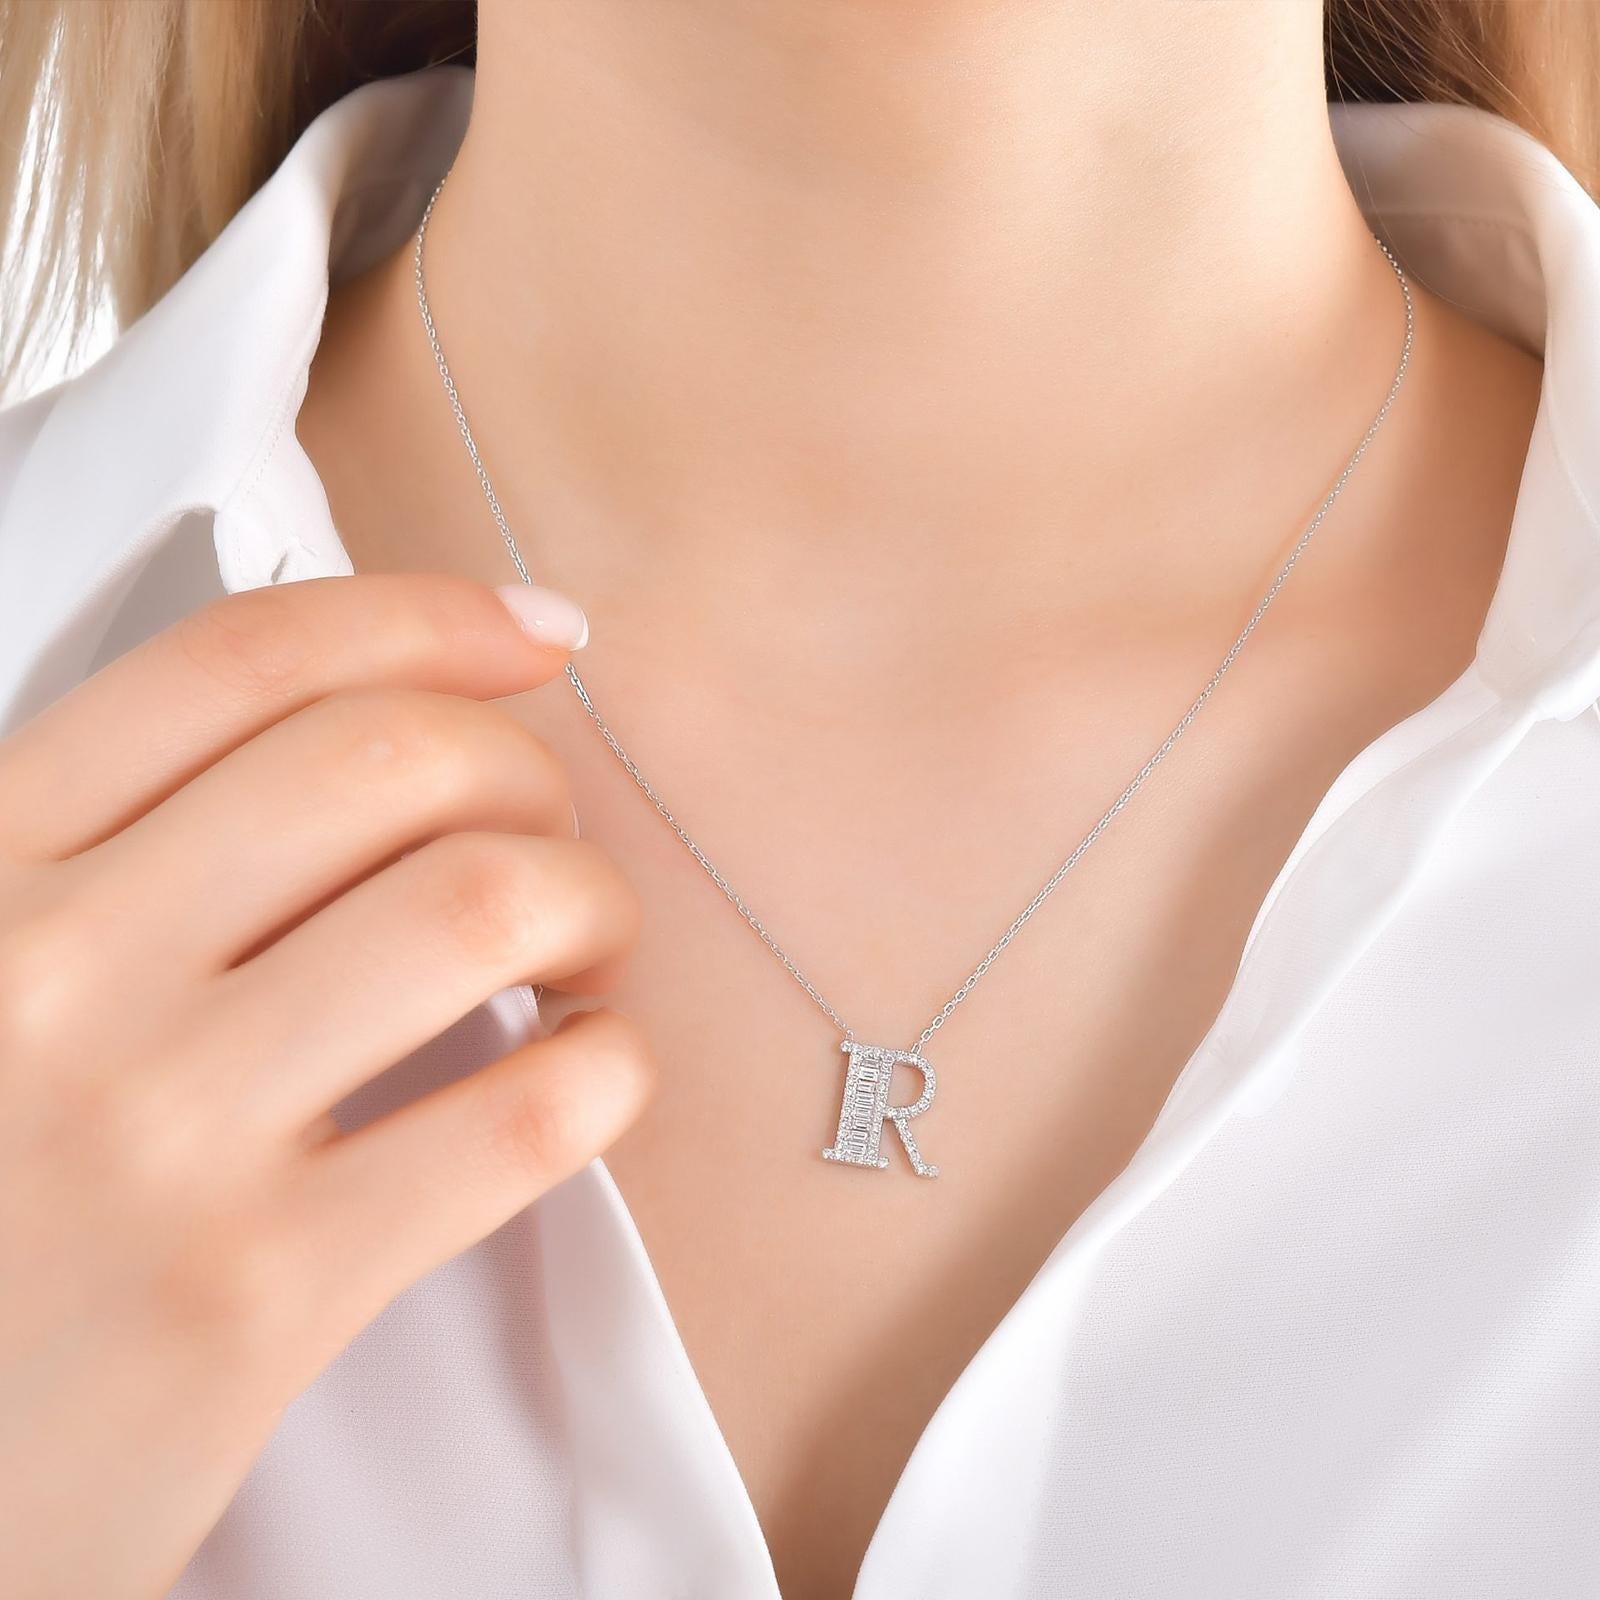 This Beautiful Baguette Diamond Letter Pendant Is Entirely Handcrafted In 14 Karat White Gold. 
The Letter R Pendant Is Garlanded With Channel-Set Baguette-Cut Diamonds And Prong Set Brilliant Round Diamonds Weighing 0.47 Carats. All Of The Stones